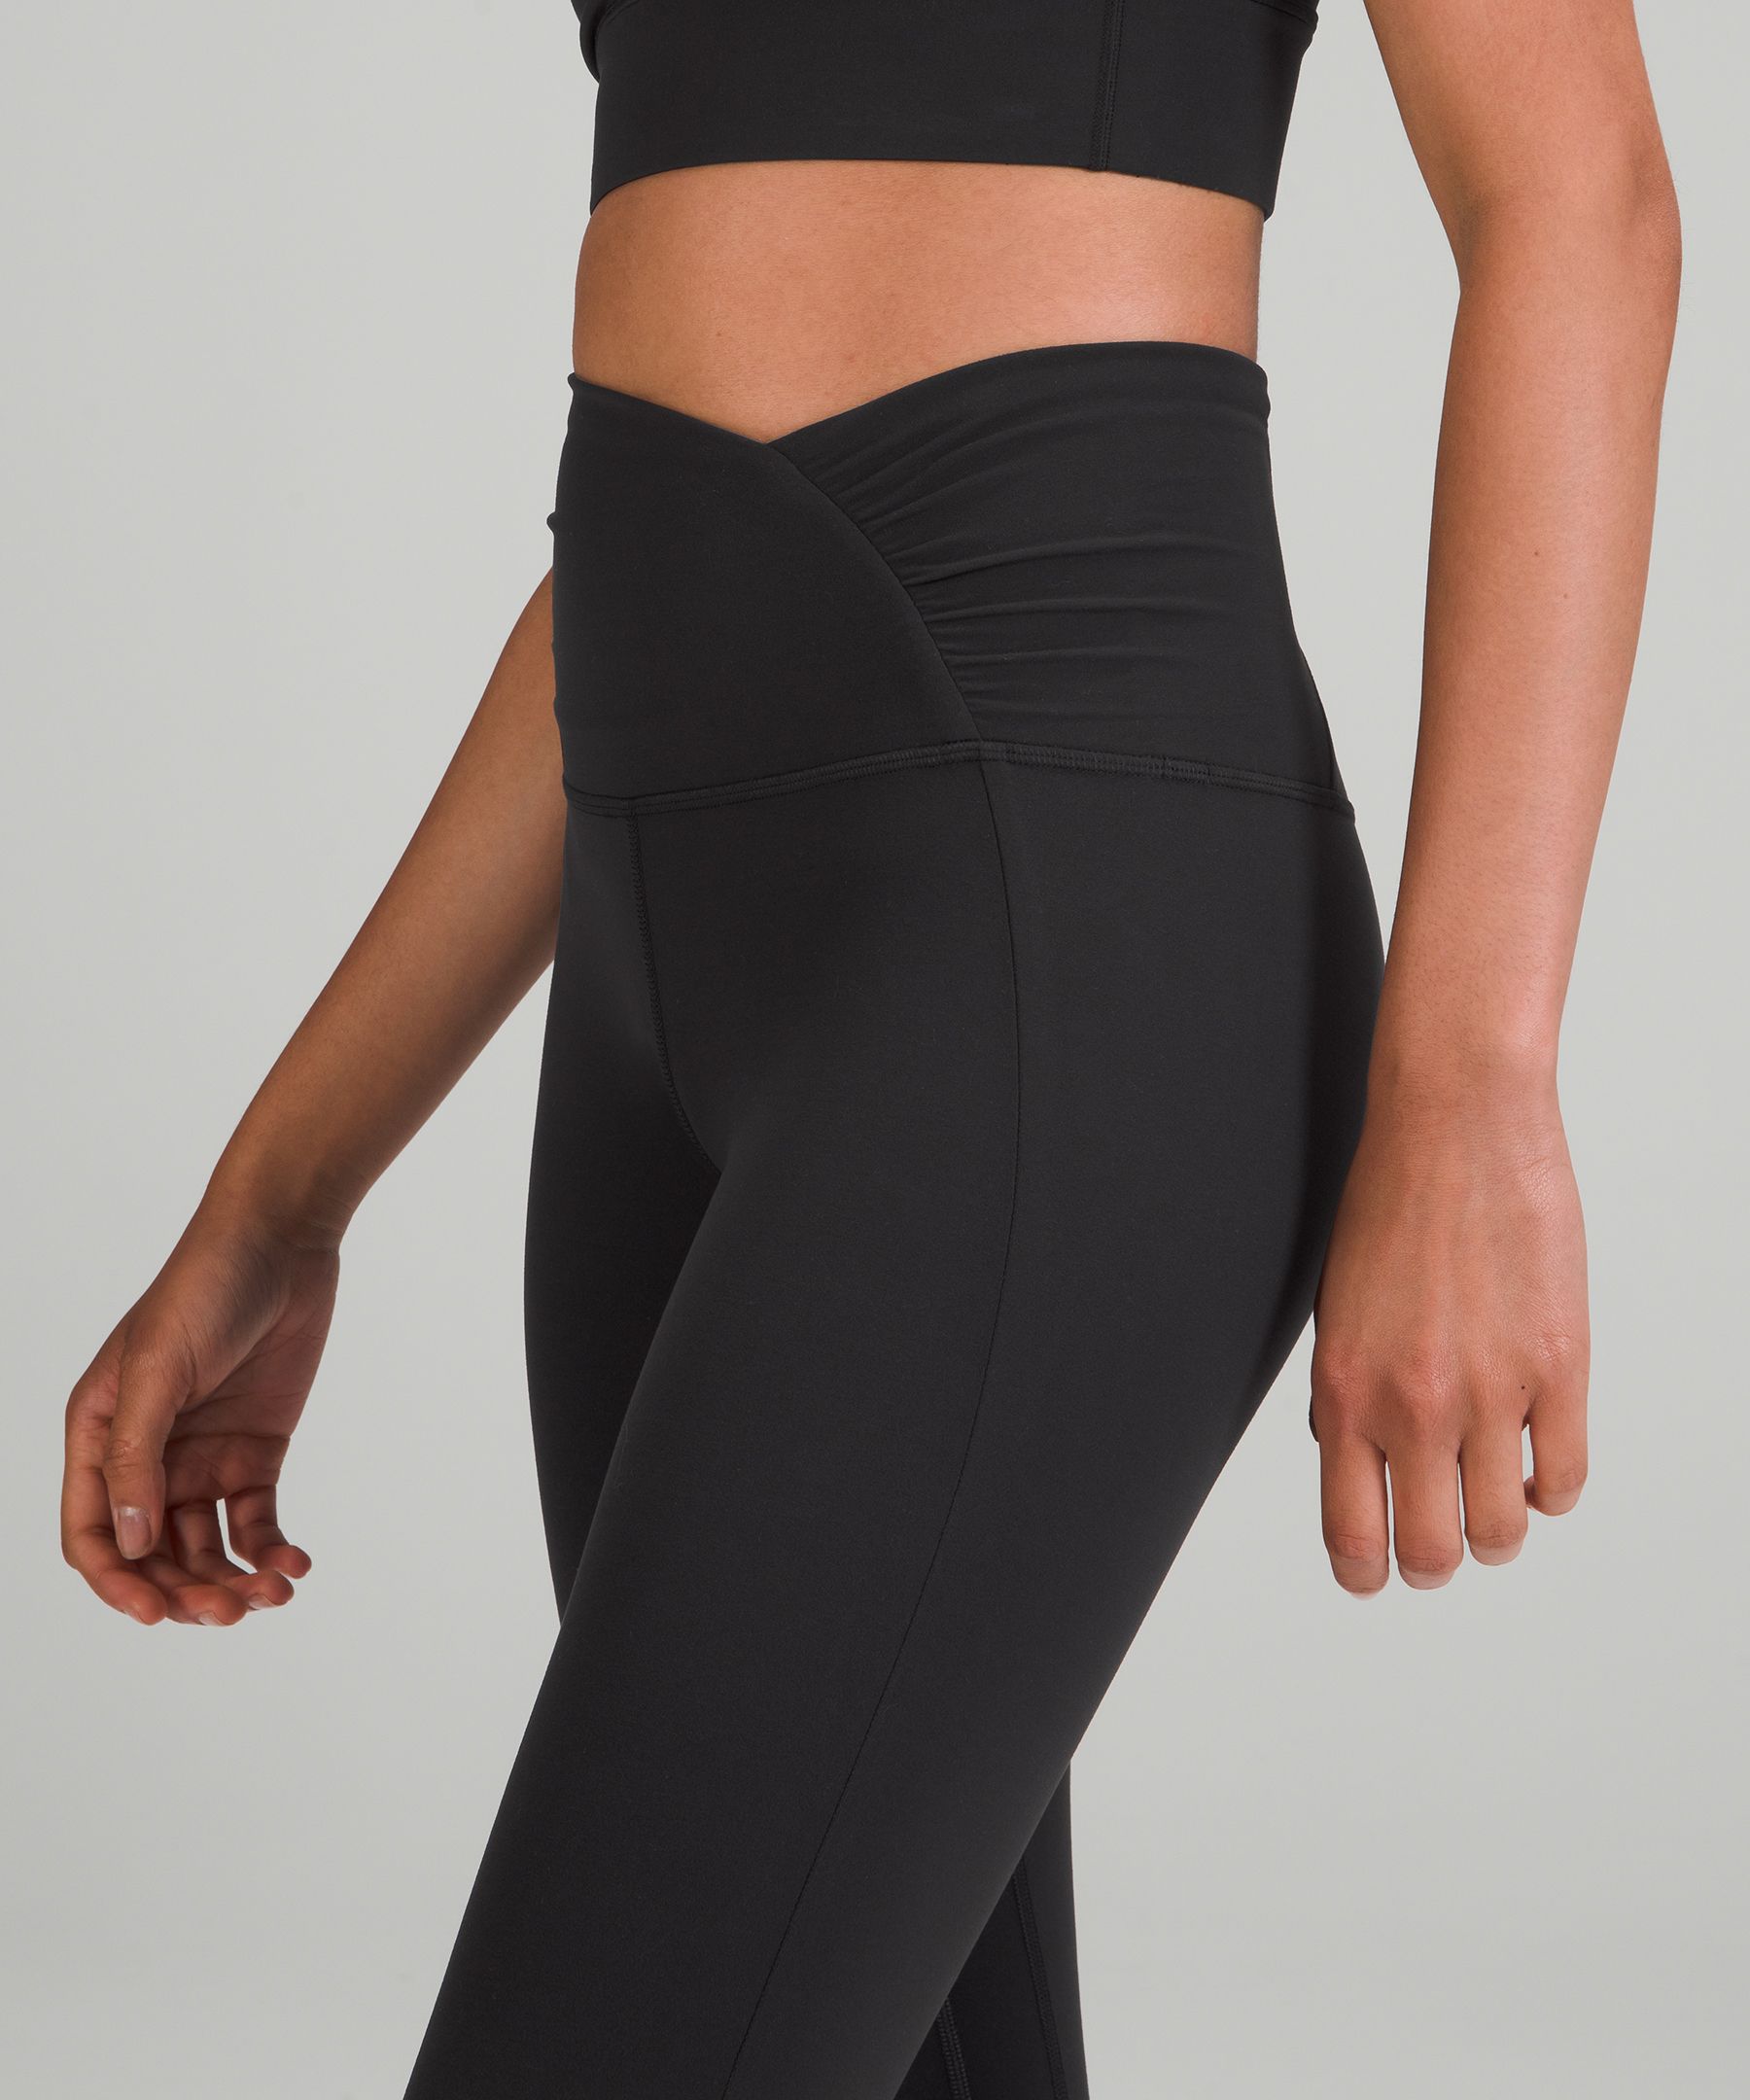 NEW LULULEMON LEGGING TRY ON REVIEW / ALIGN HIGH RISE PANT 25 RUCHED HAUL  